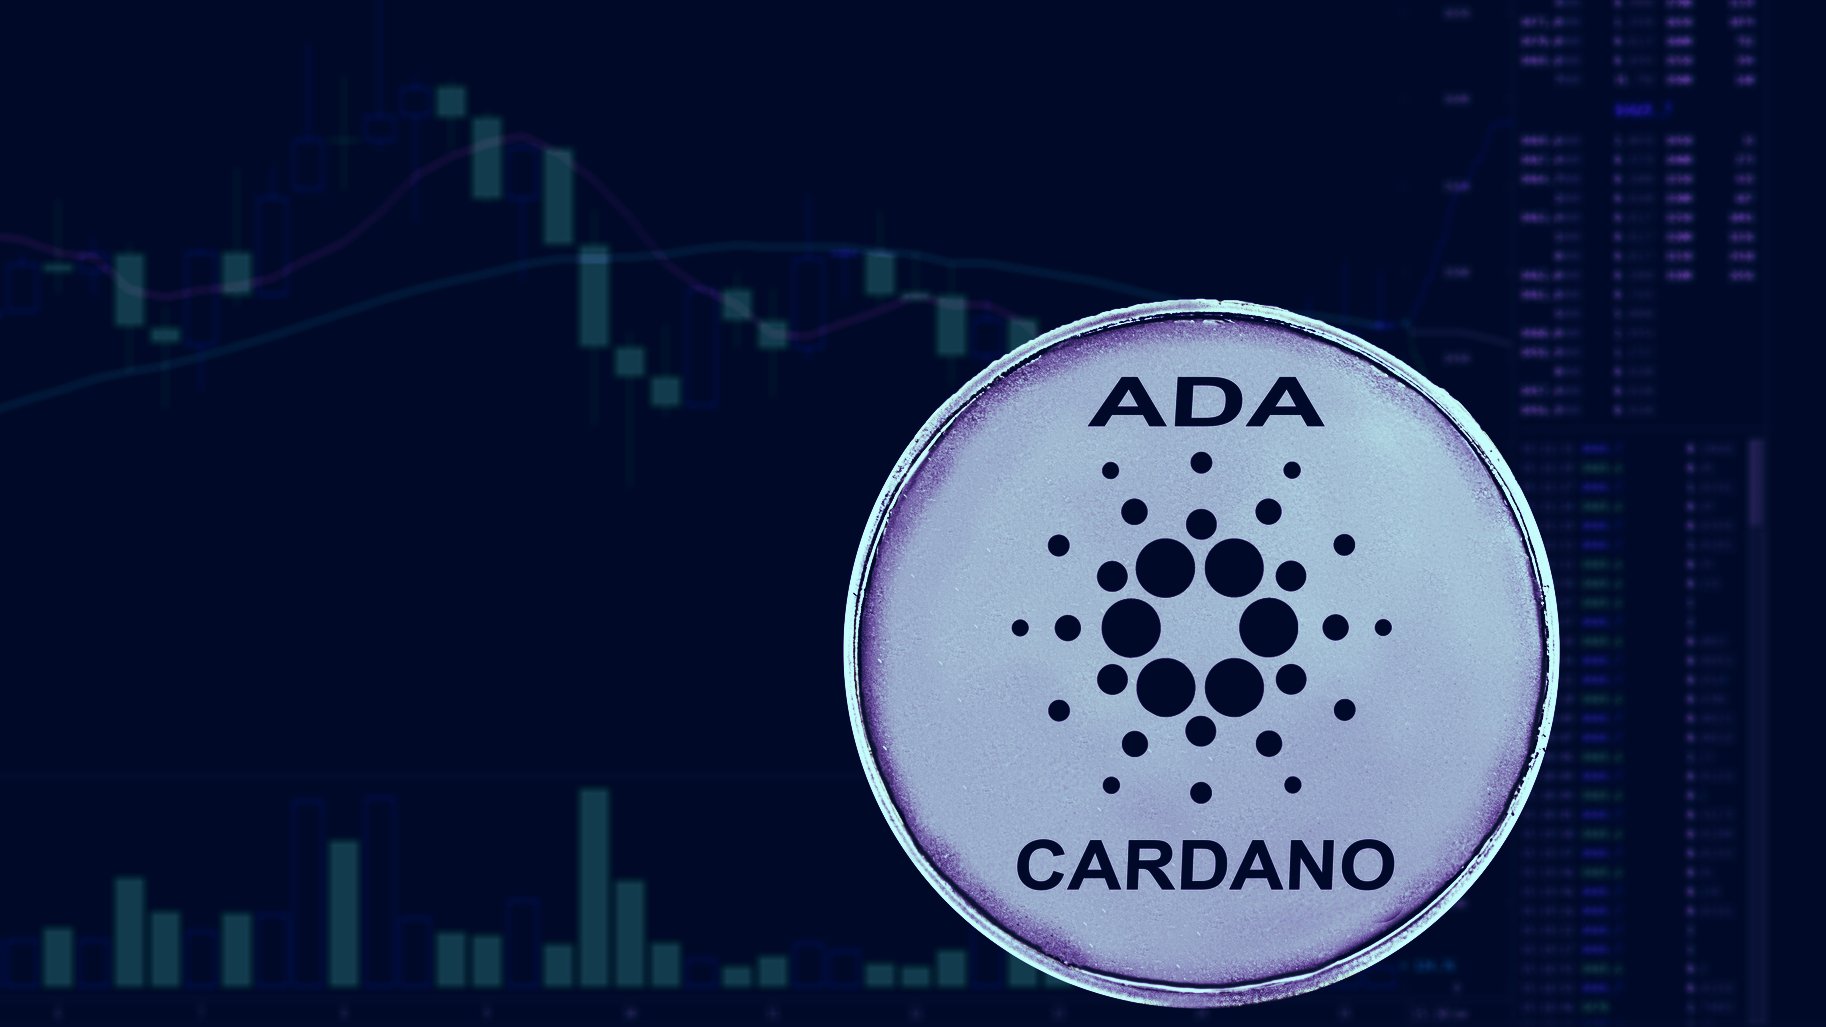 Why Cardano Is On A Hot Streak With 10% Gains In 1 Day